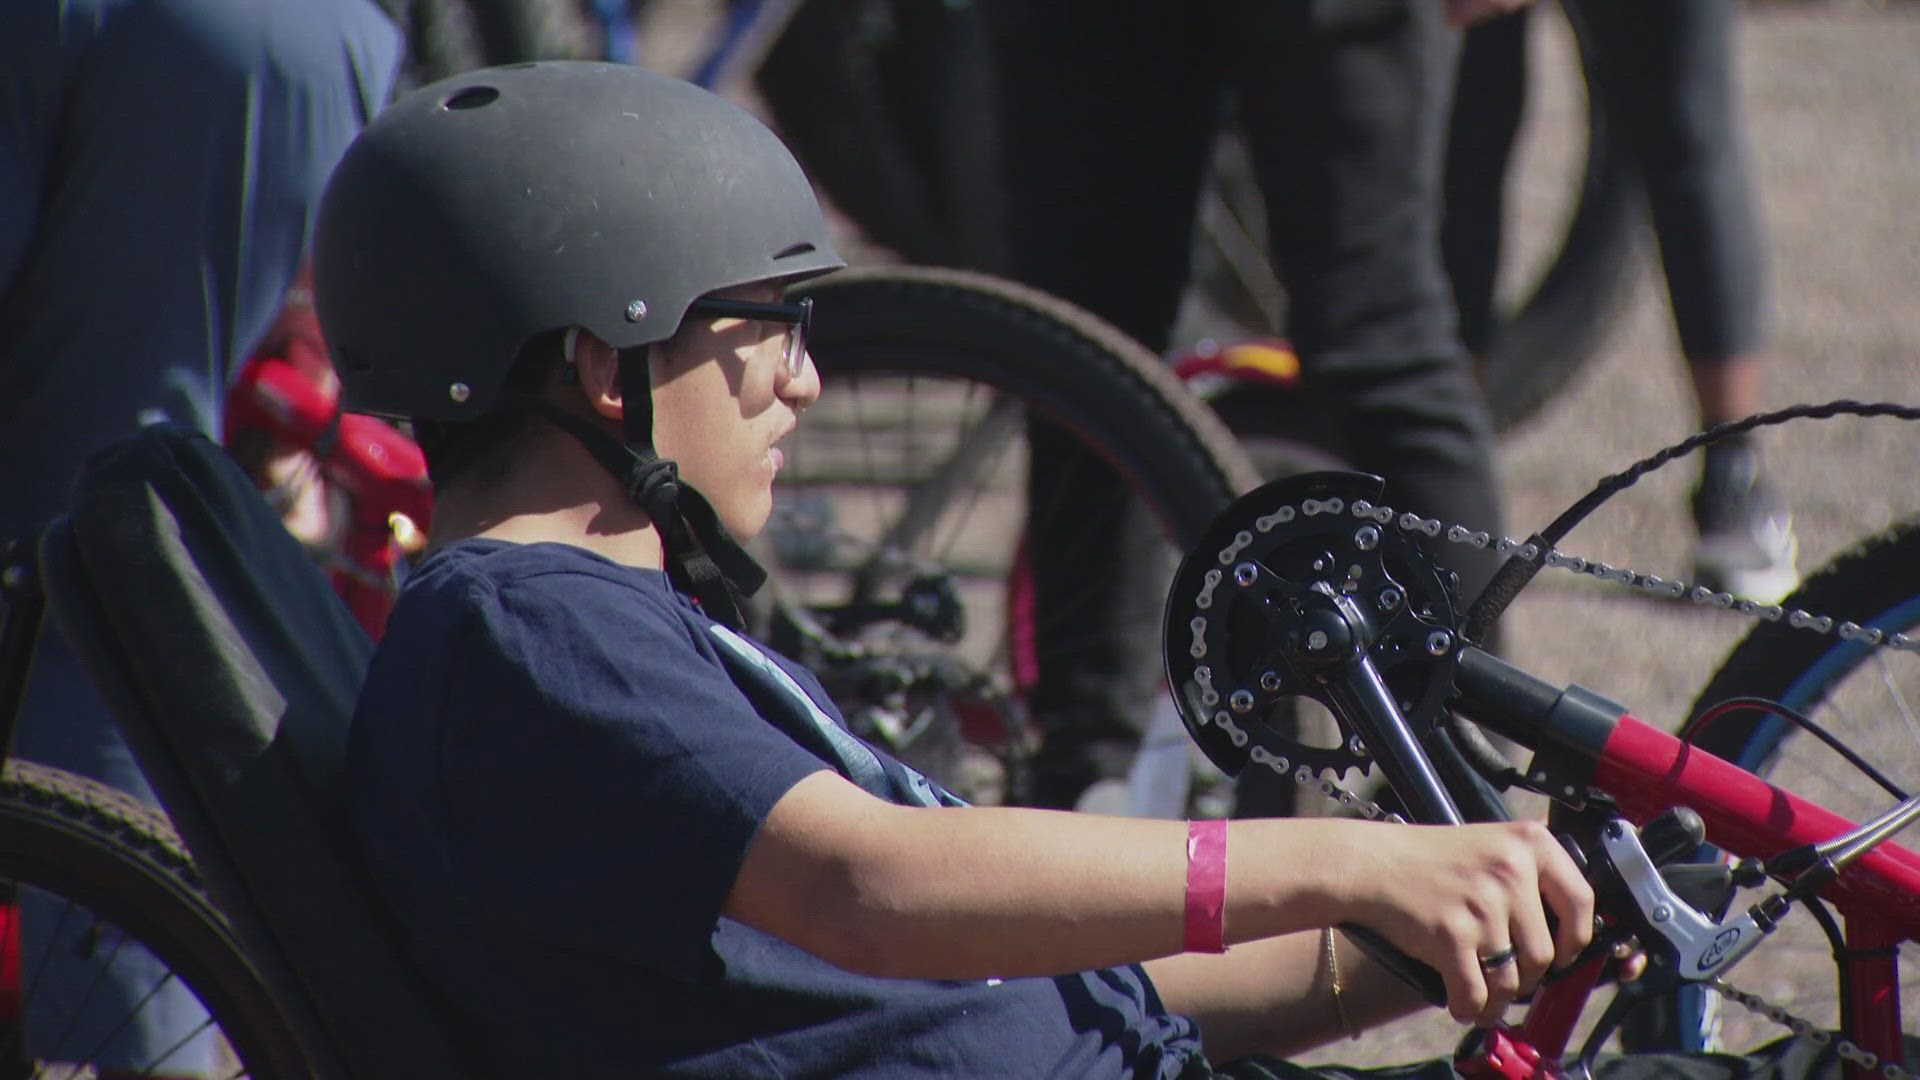 The National Sports Center for the Disabled hosted a field day for about 100 students from Aurora Public Schools to help launch their new program.